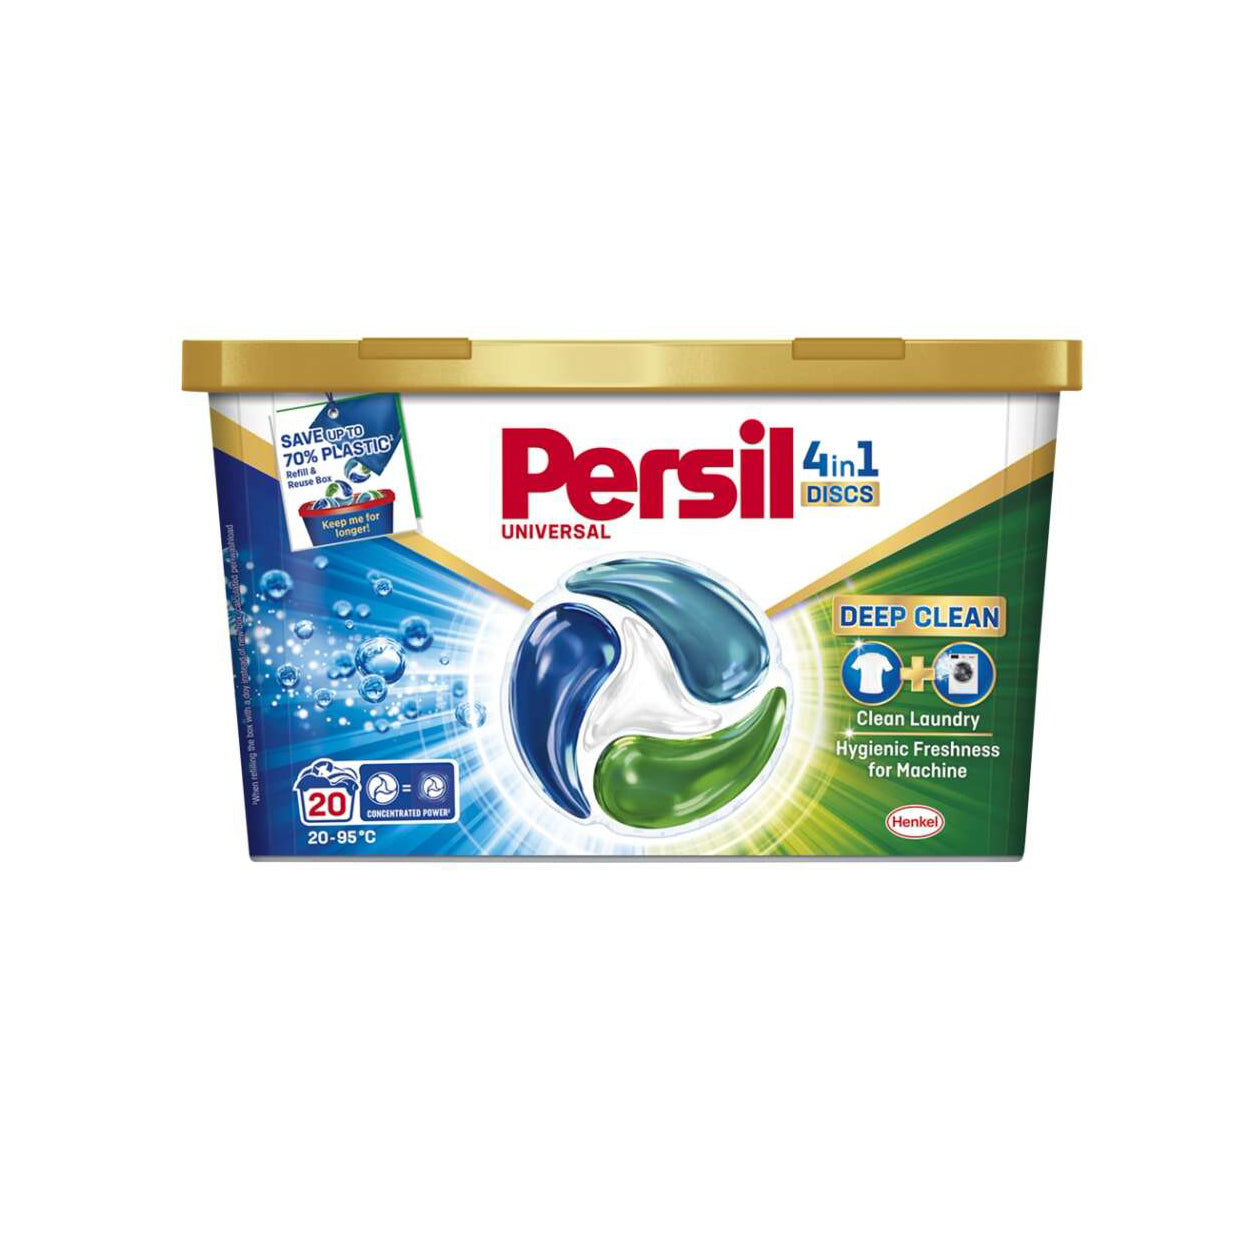 Persil 4in1 Discs Universal Washing Capsule 20 washes